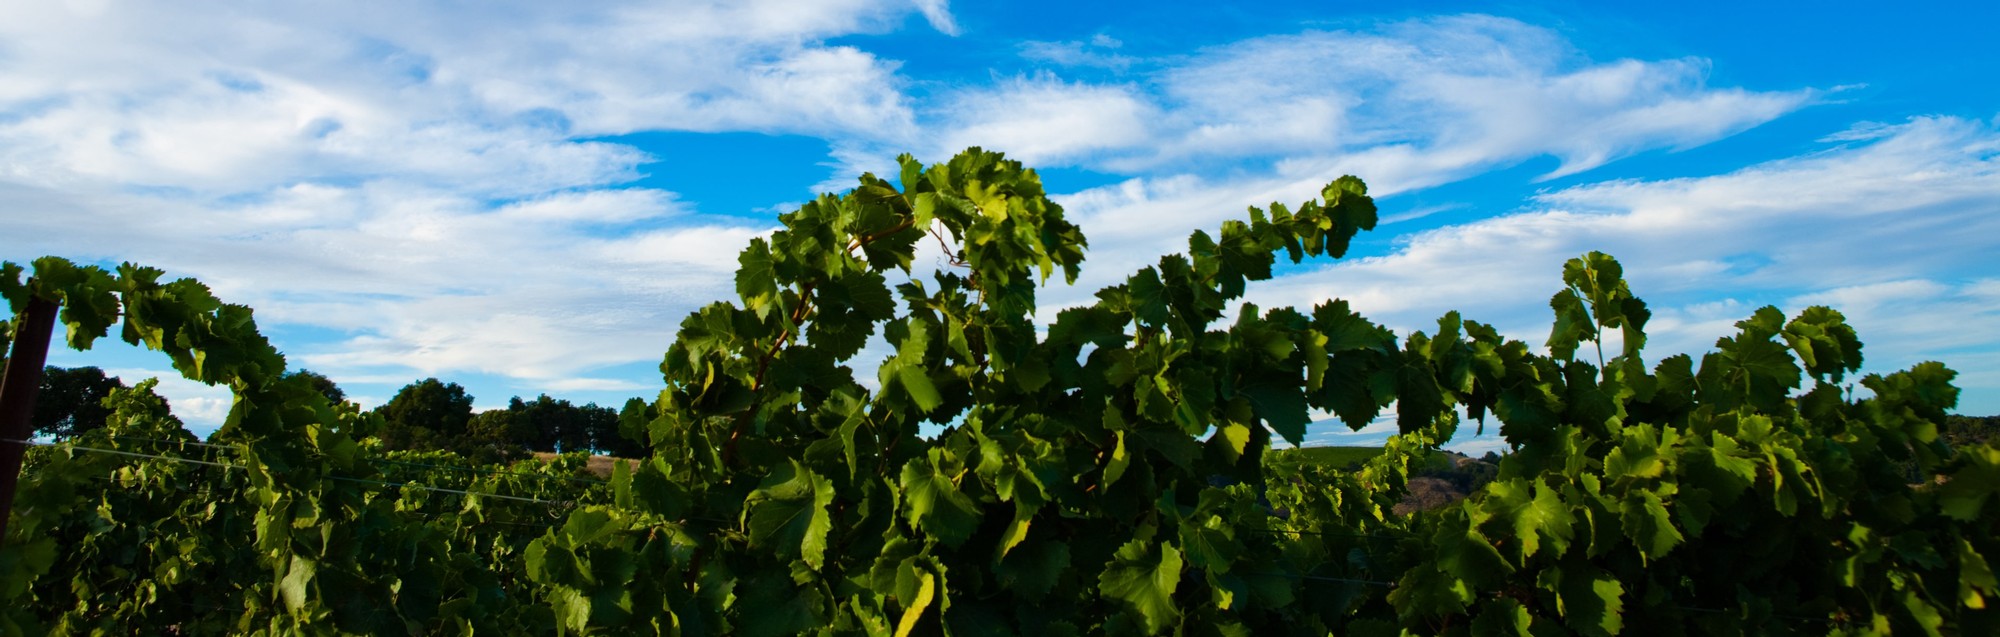 Grapevines in Calcareous Vineyard in Paso Robles reaching toward the sky